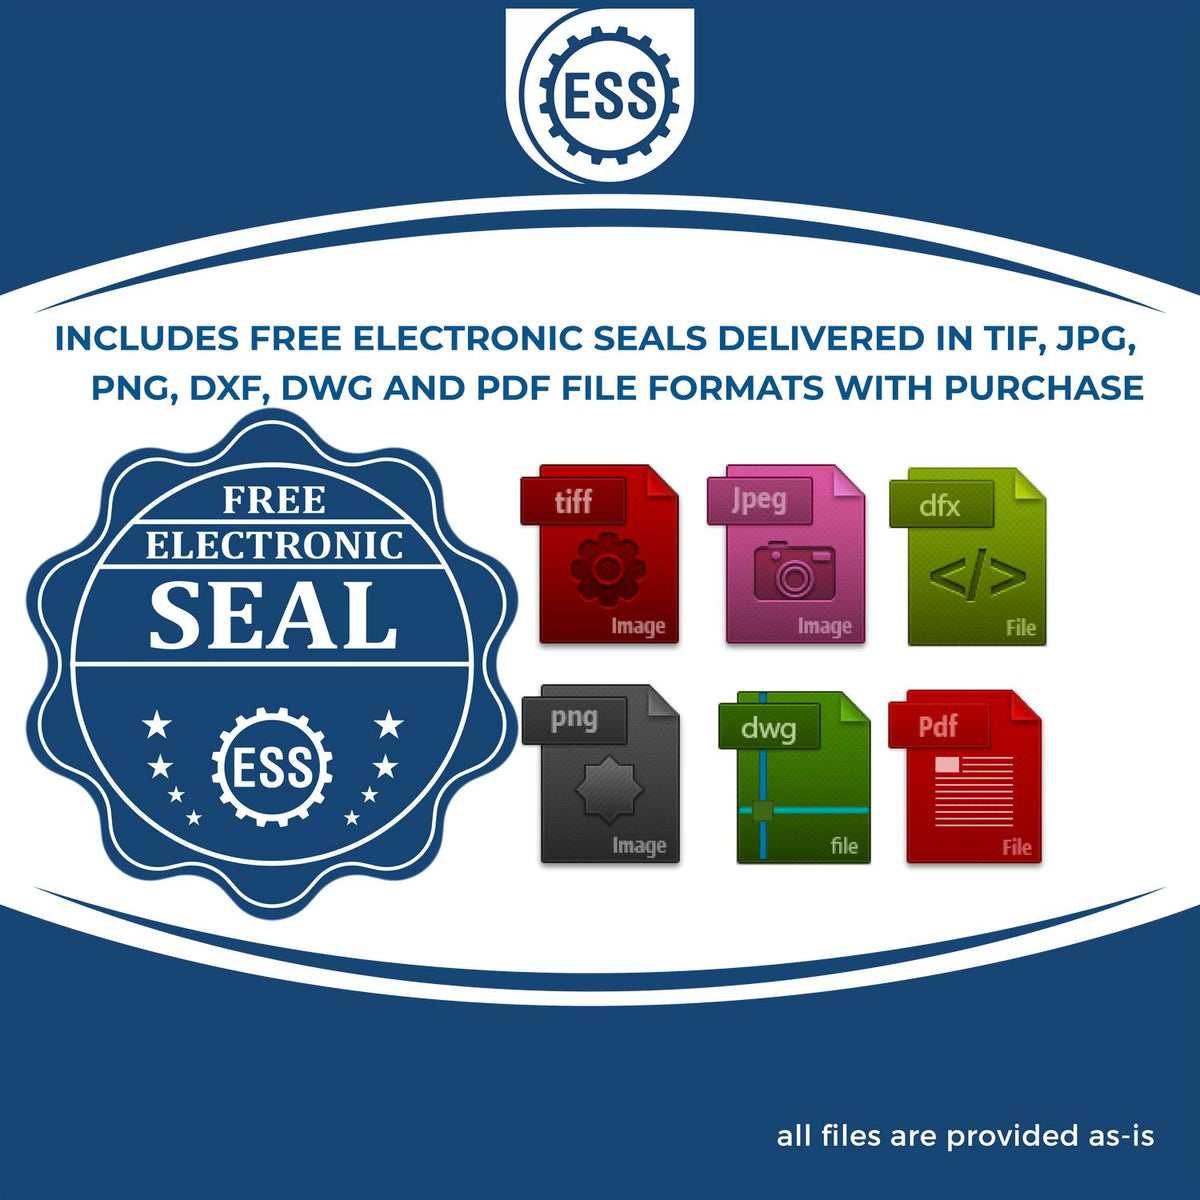 An infographic for the free electronic seal for the Self-Inking New Jersey PE Stamp illustrating the different file type icons such as DXF, DWG, TIF, JPG and PNG.